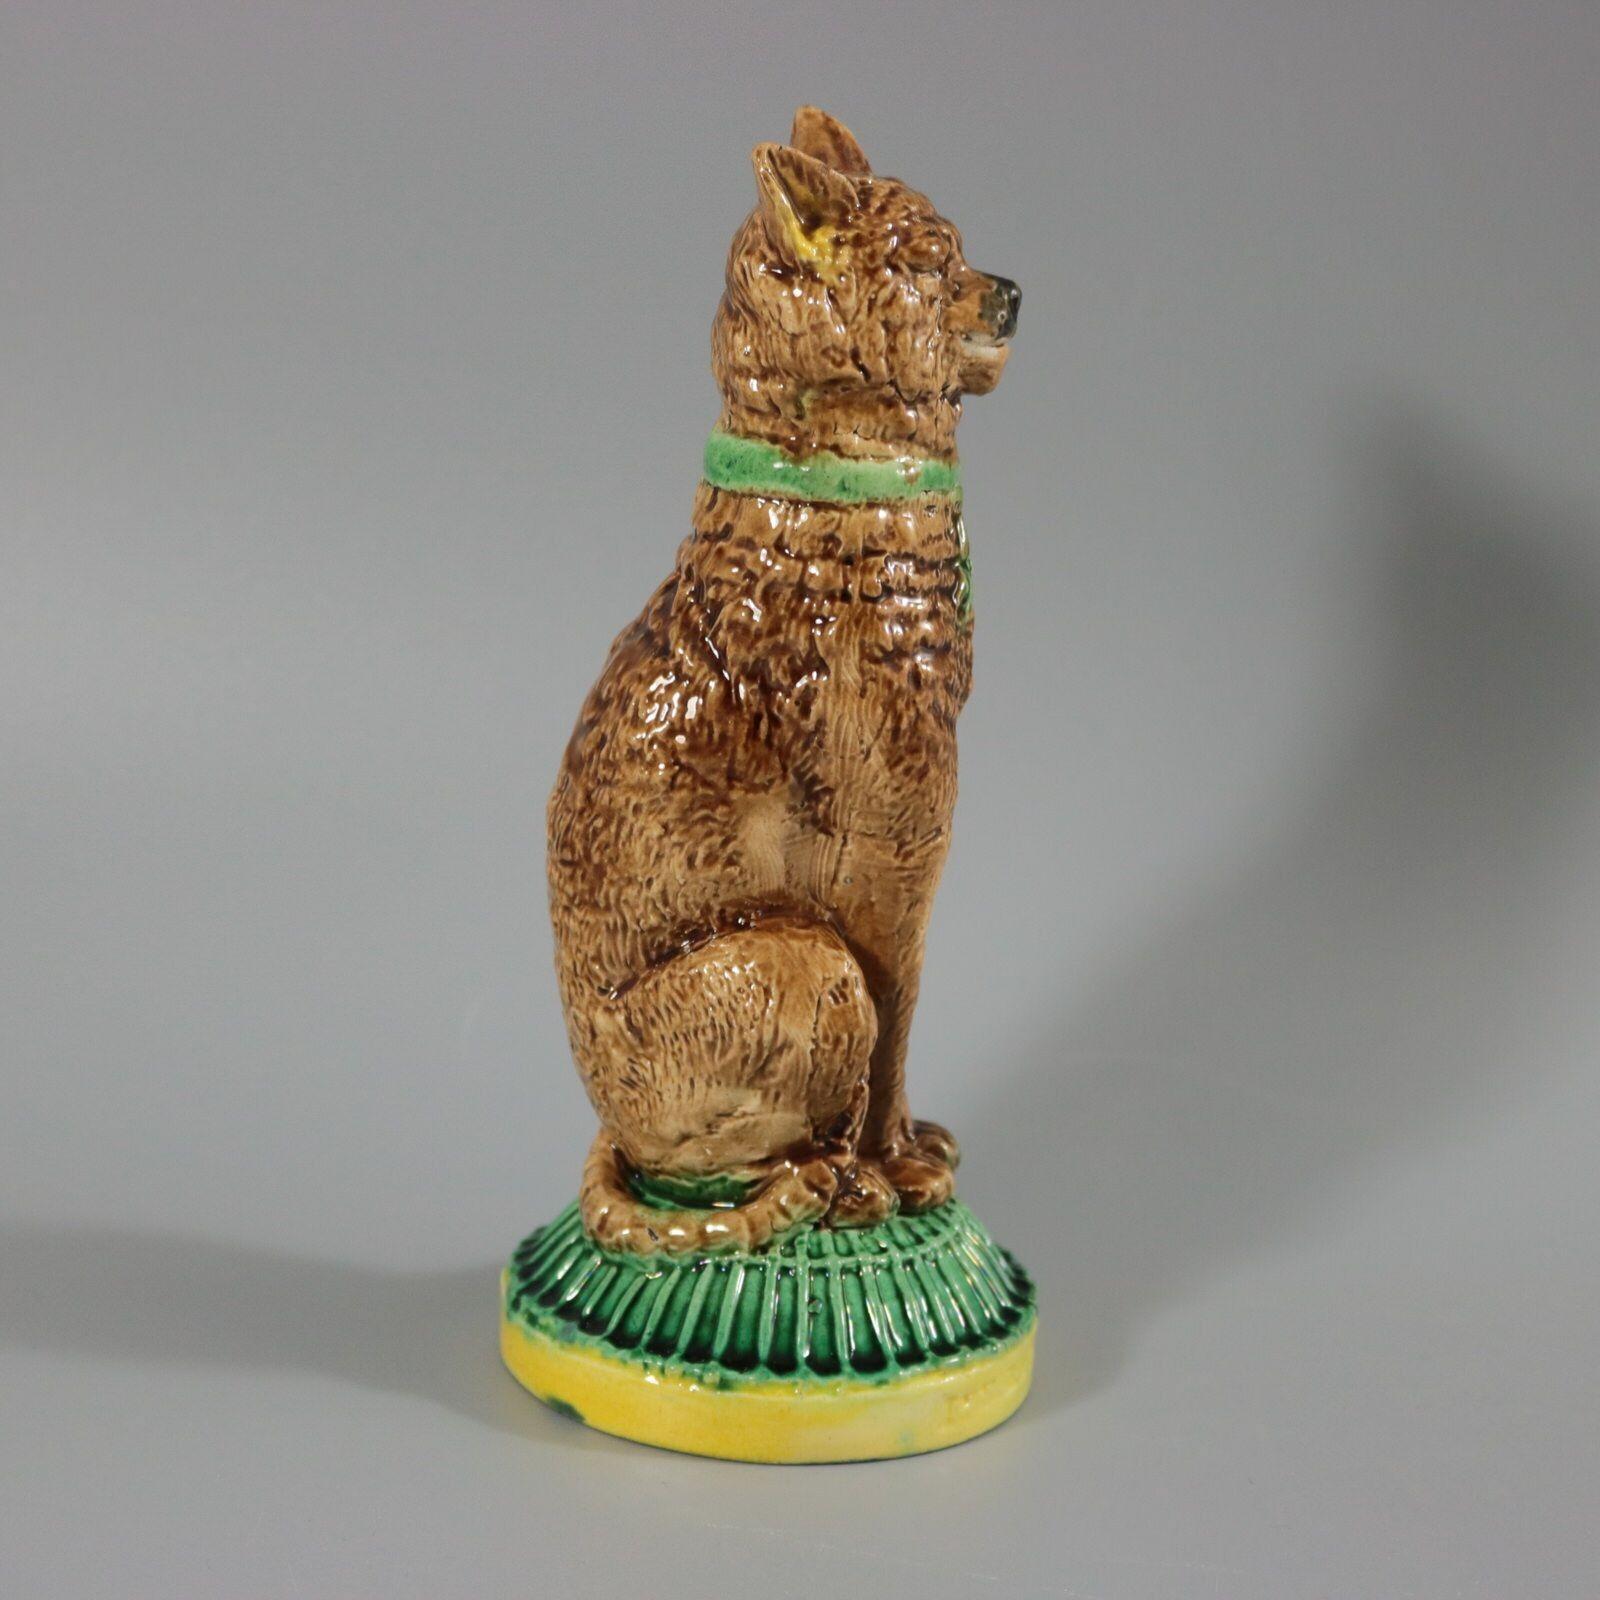 English Majolica Cat 'Ive Eaten the Canary' Figure 3